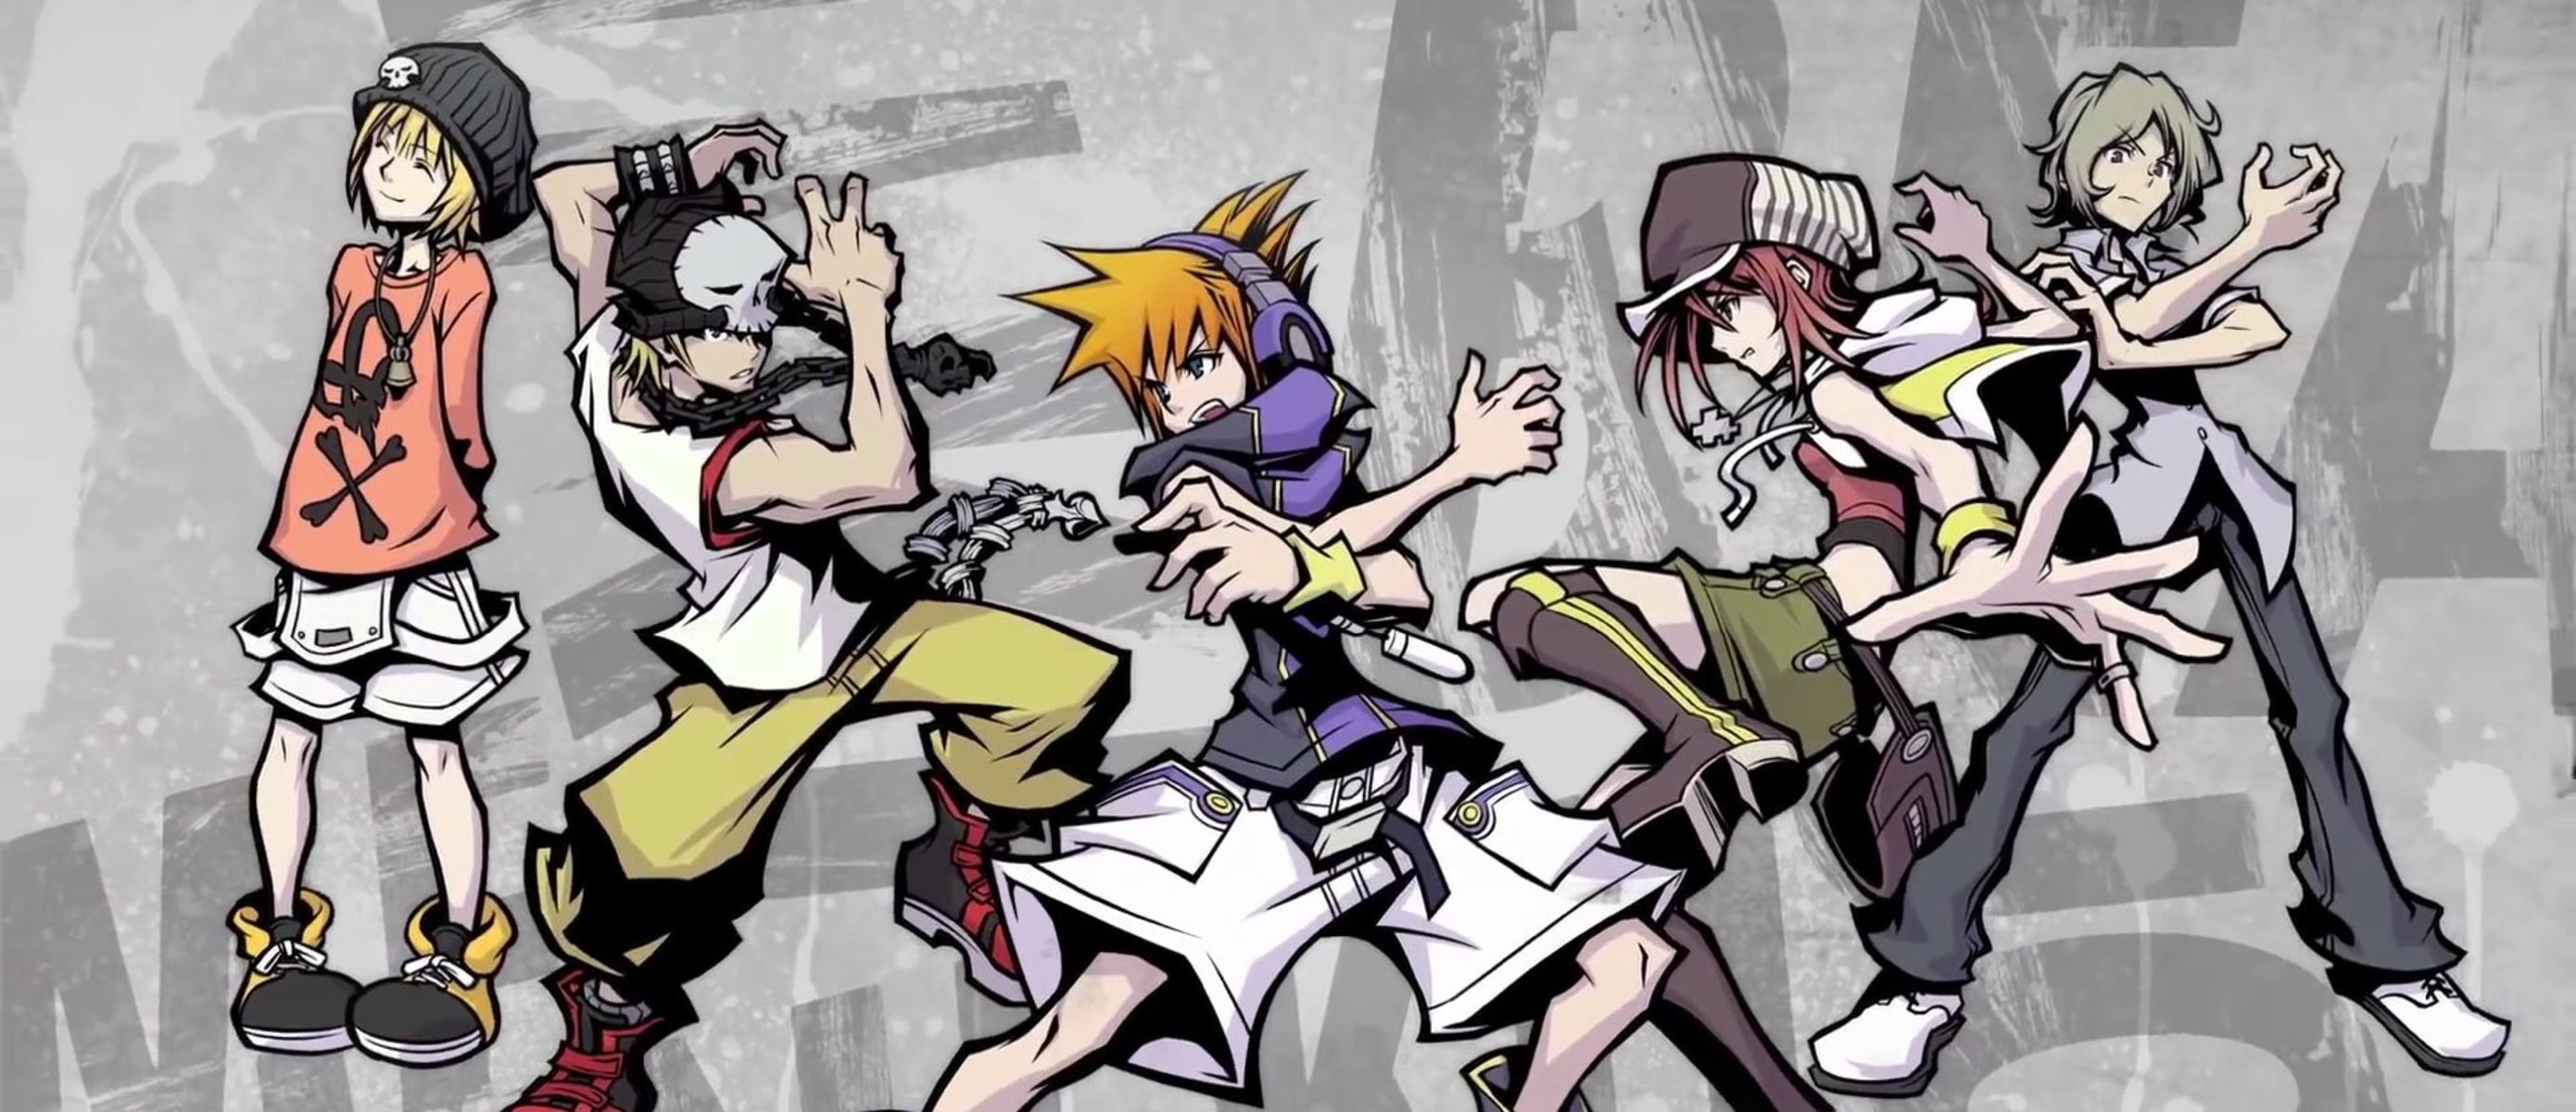 One who has the world. The World ends with you. The World ends with you игра. Neo the World ends with you.